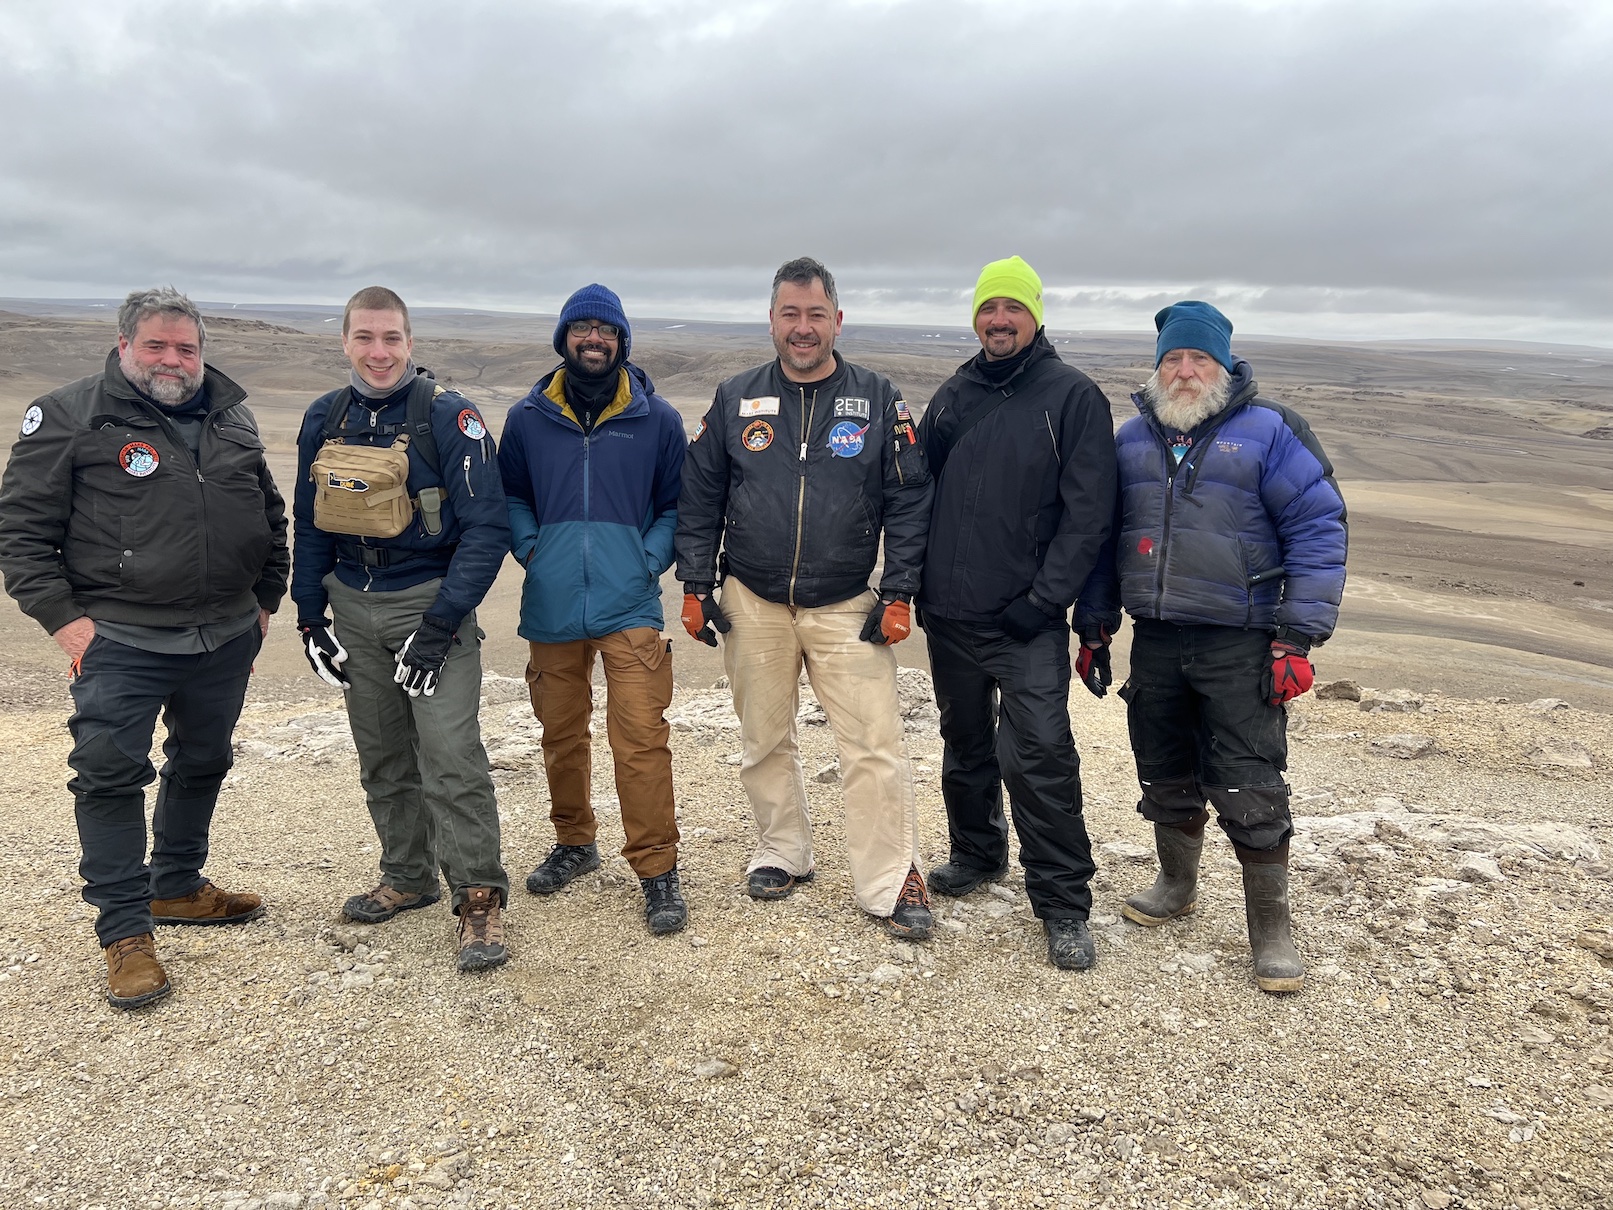 The team members of the 2022 Haughton-Mars Project pose for a group picture in the Arctic.